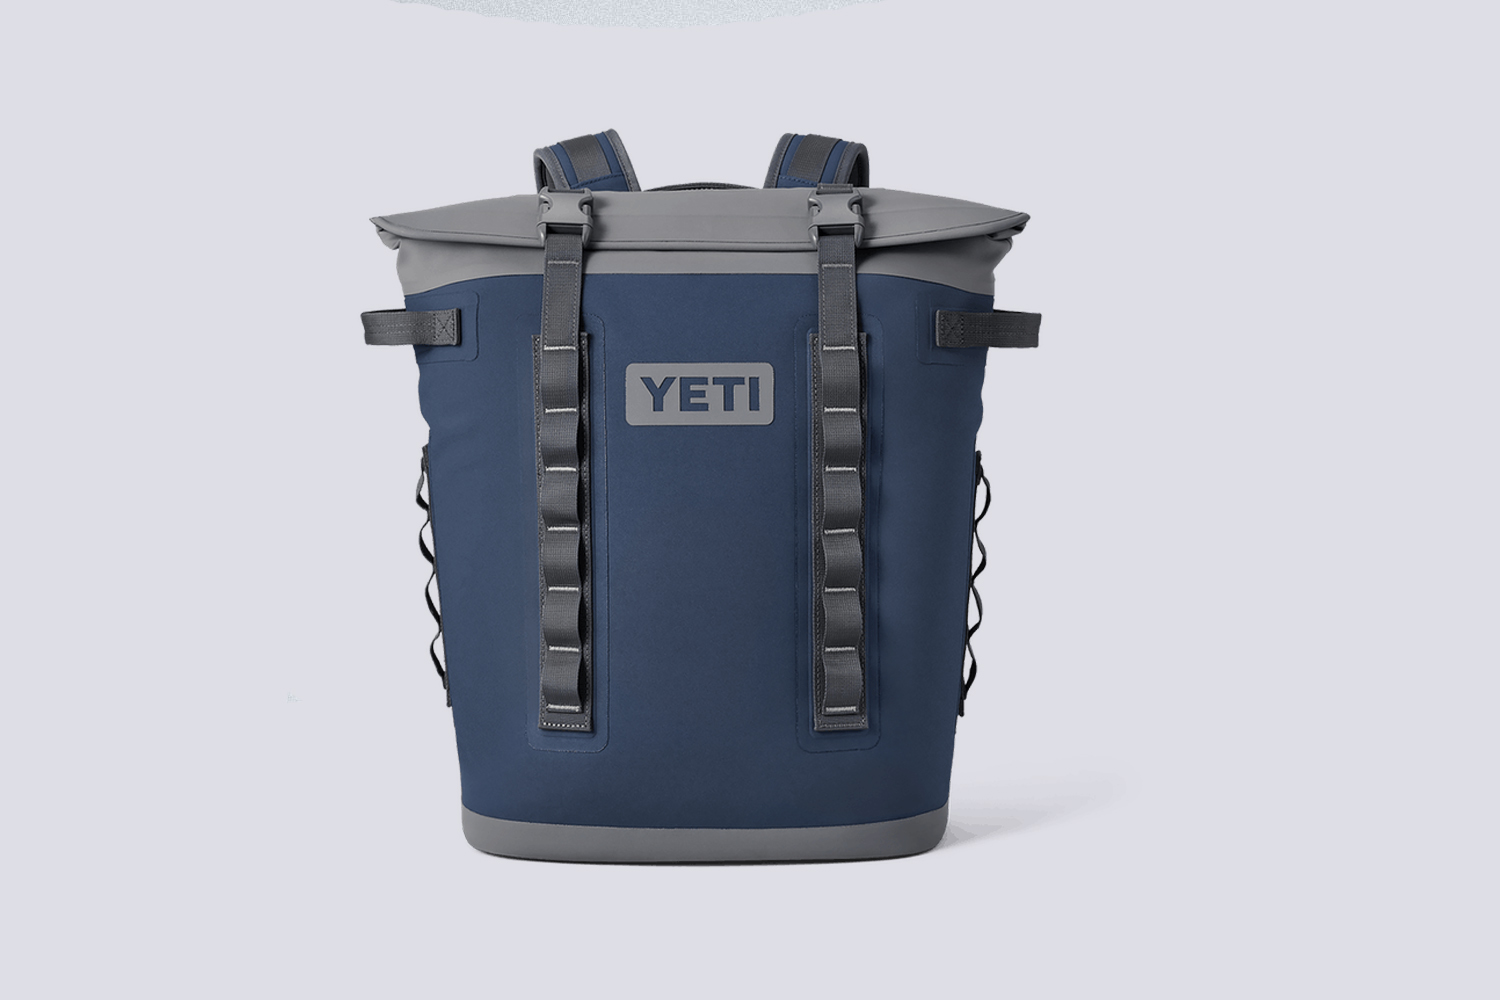 The Yeti Hopper M20 Backpack Cooler is the best overall backpack cooler of 2022, perfect for beach trips, camping adventures and more